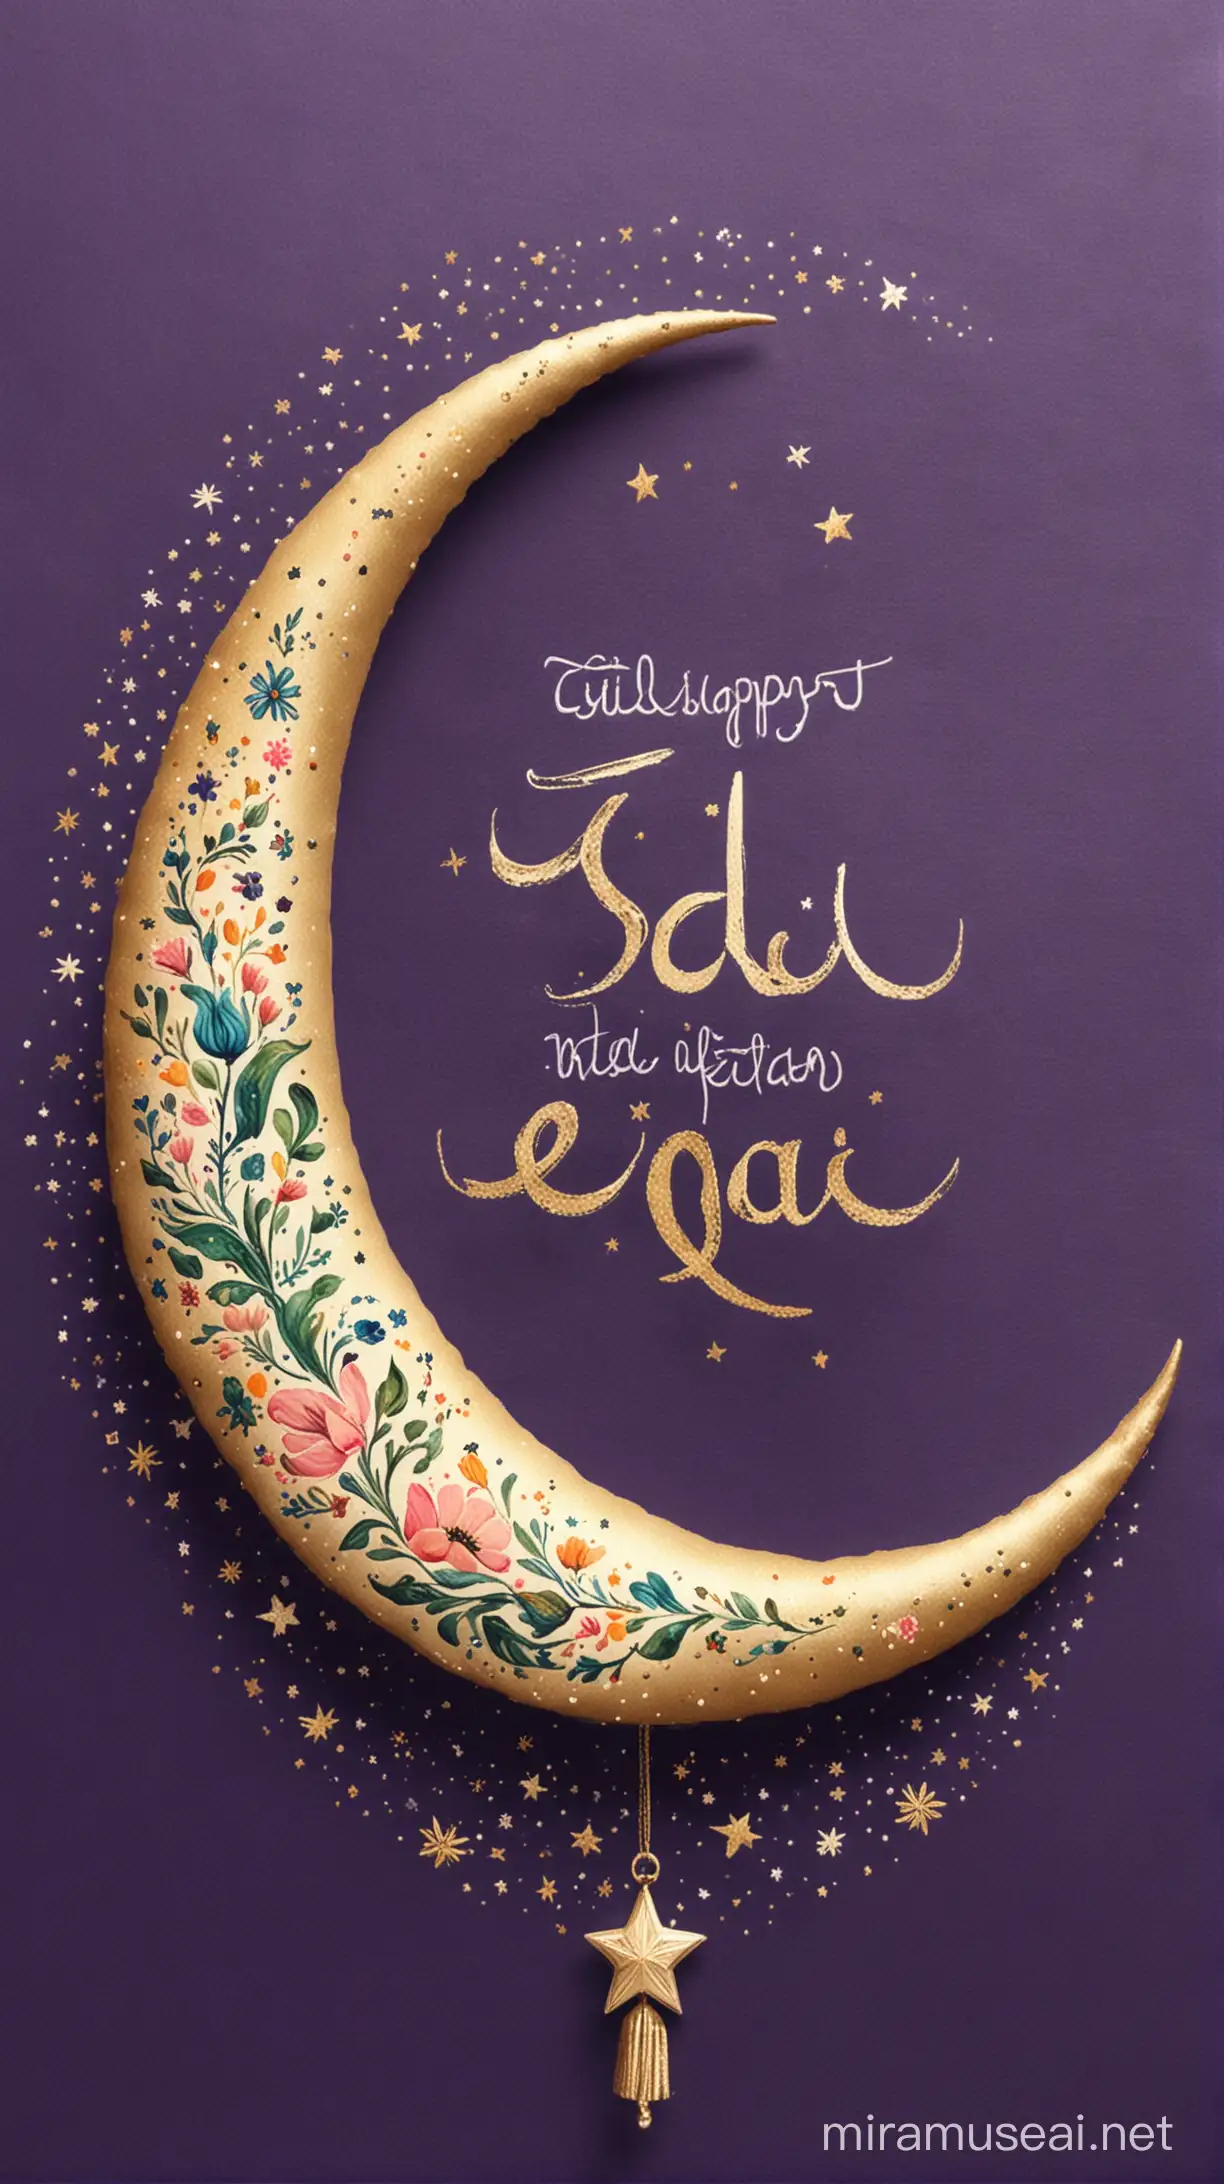 Hand painted crescent for Eid greetings